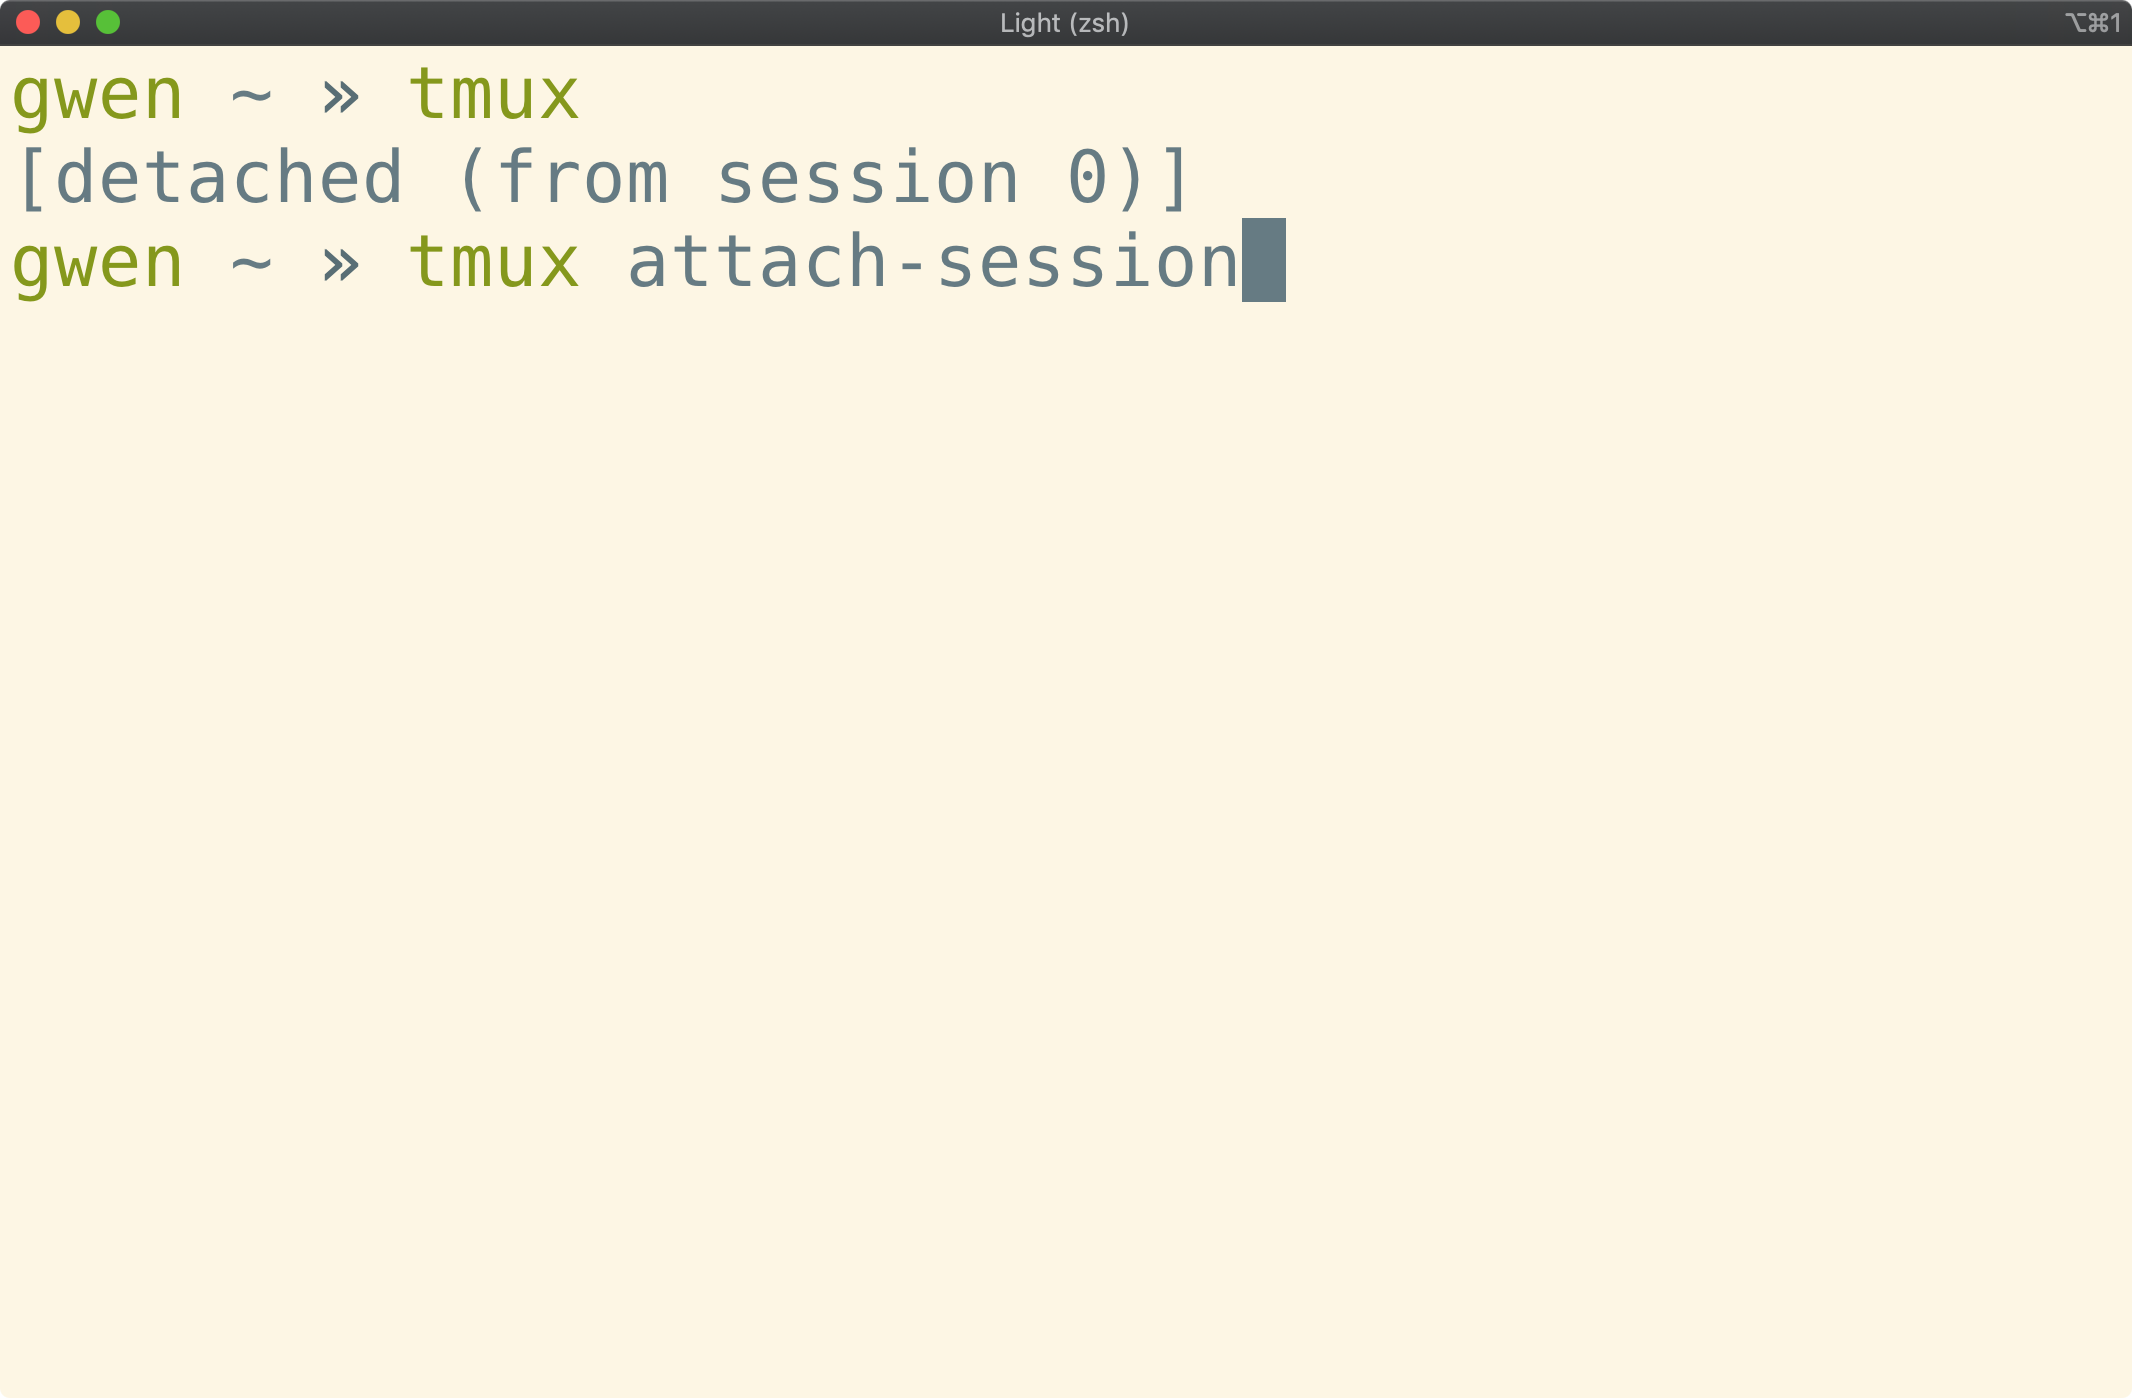 Terminal showing "tmux attach-session" typed in a prompt